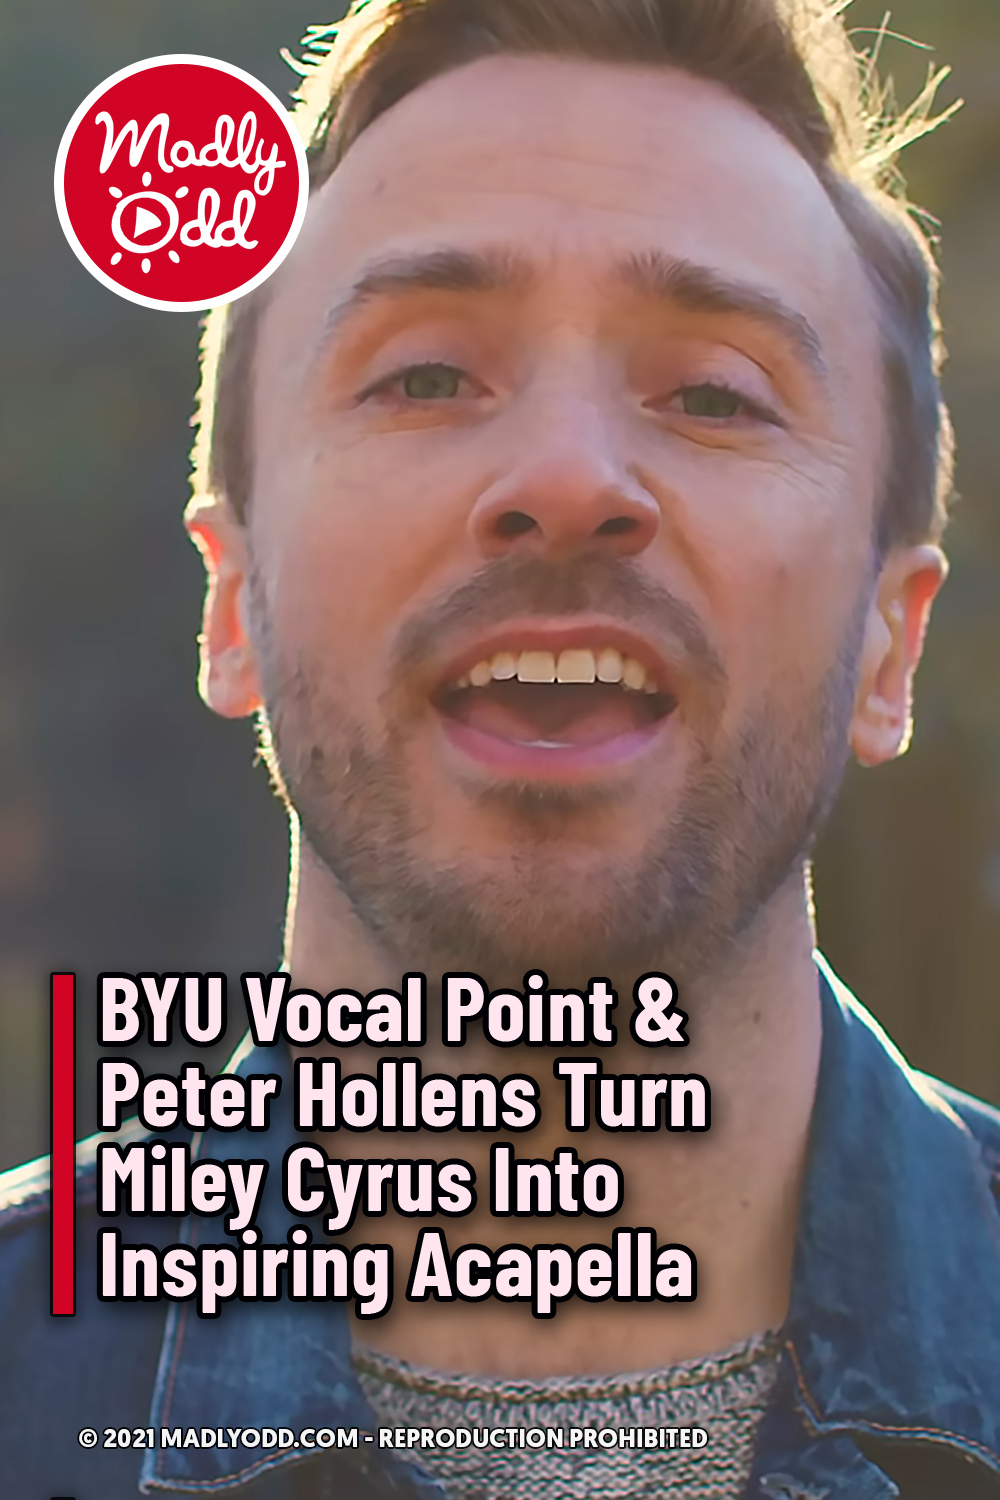 BYU Vocal Point & Peter Hollens Turn Miley Cyrus Into Inspiring Acapella